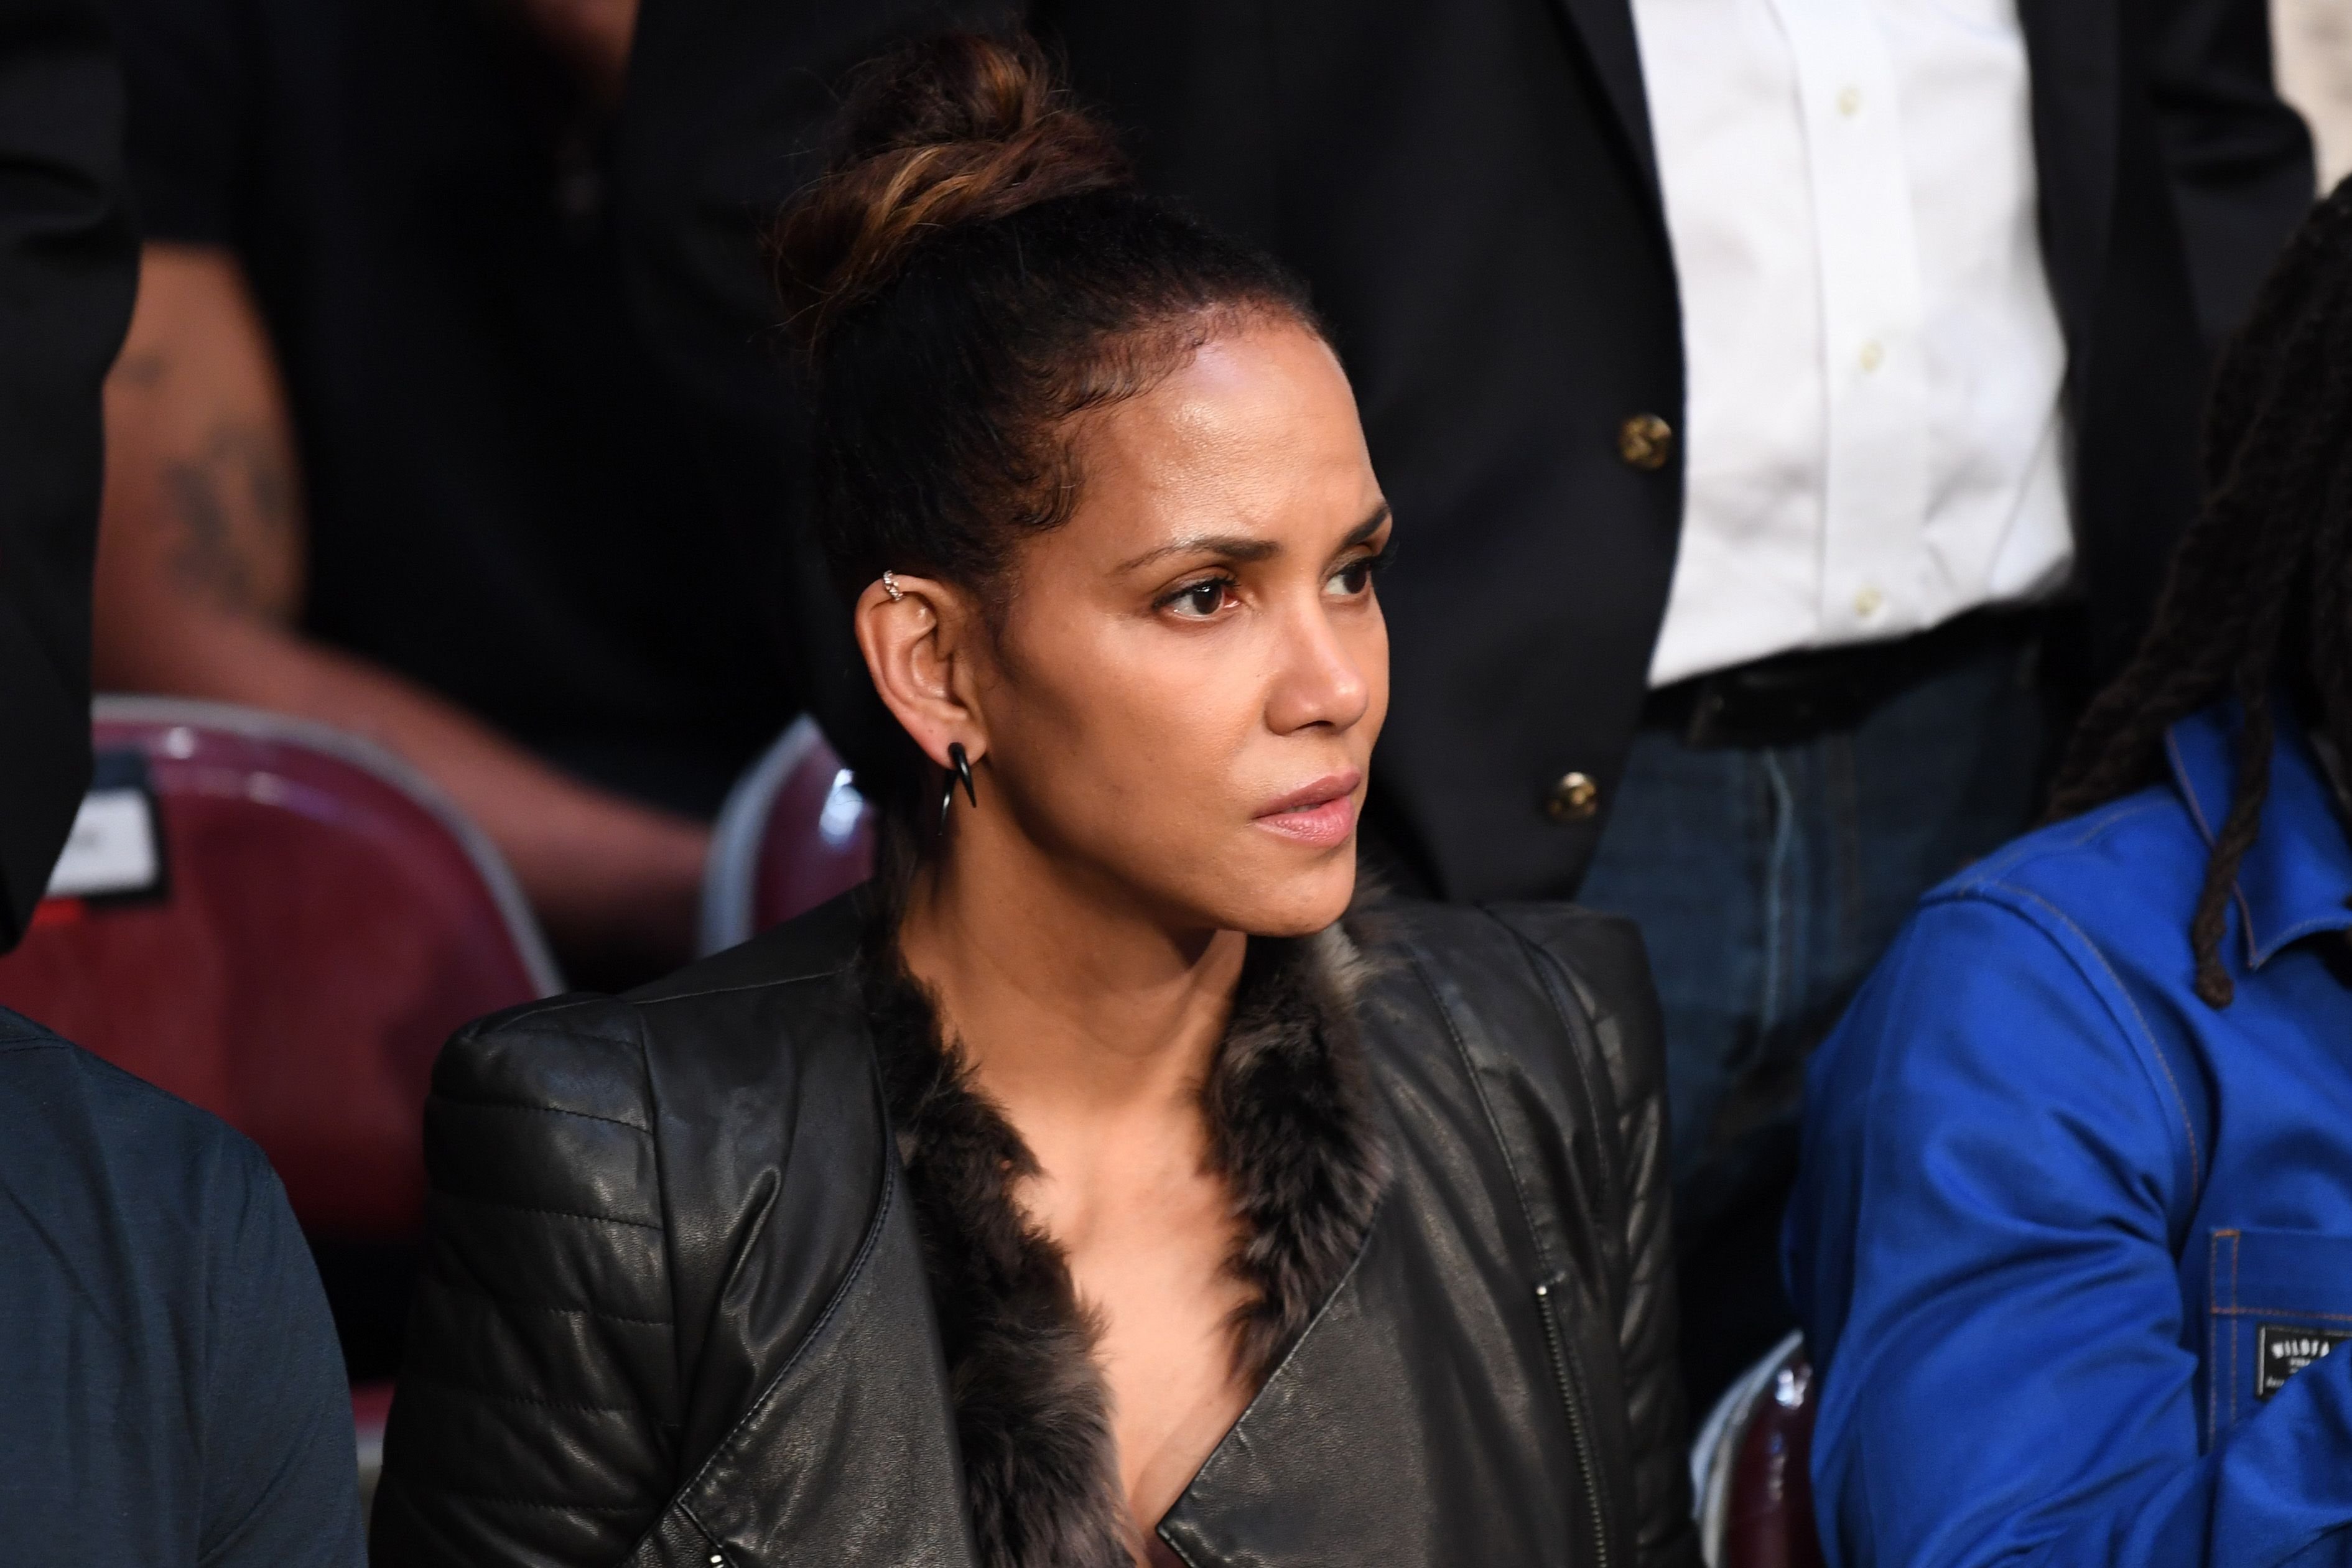 Halle Berry is seen in attendance during the UFC 247 event at Toyota Center on February 08, 2020 in Houston, Texas. | Source: Getty Images